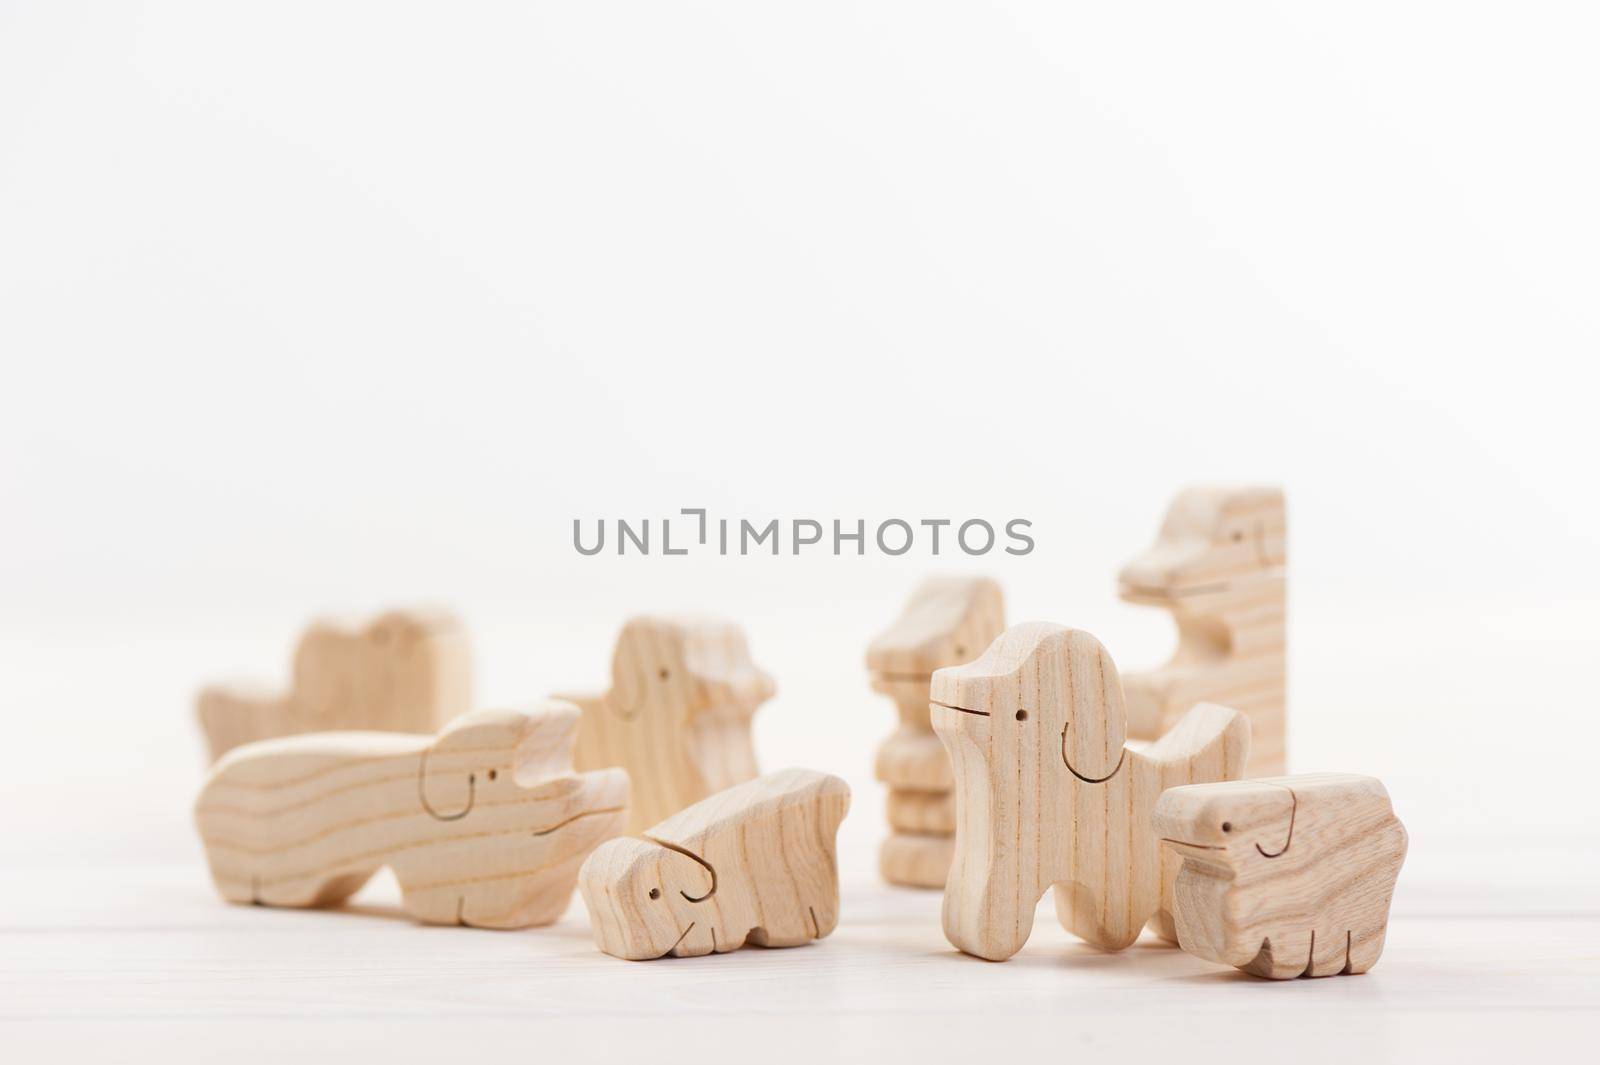 cute wooden toy animal over white background, tiny toys and shallow depth of field